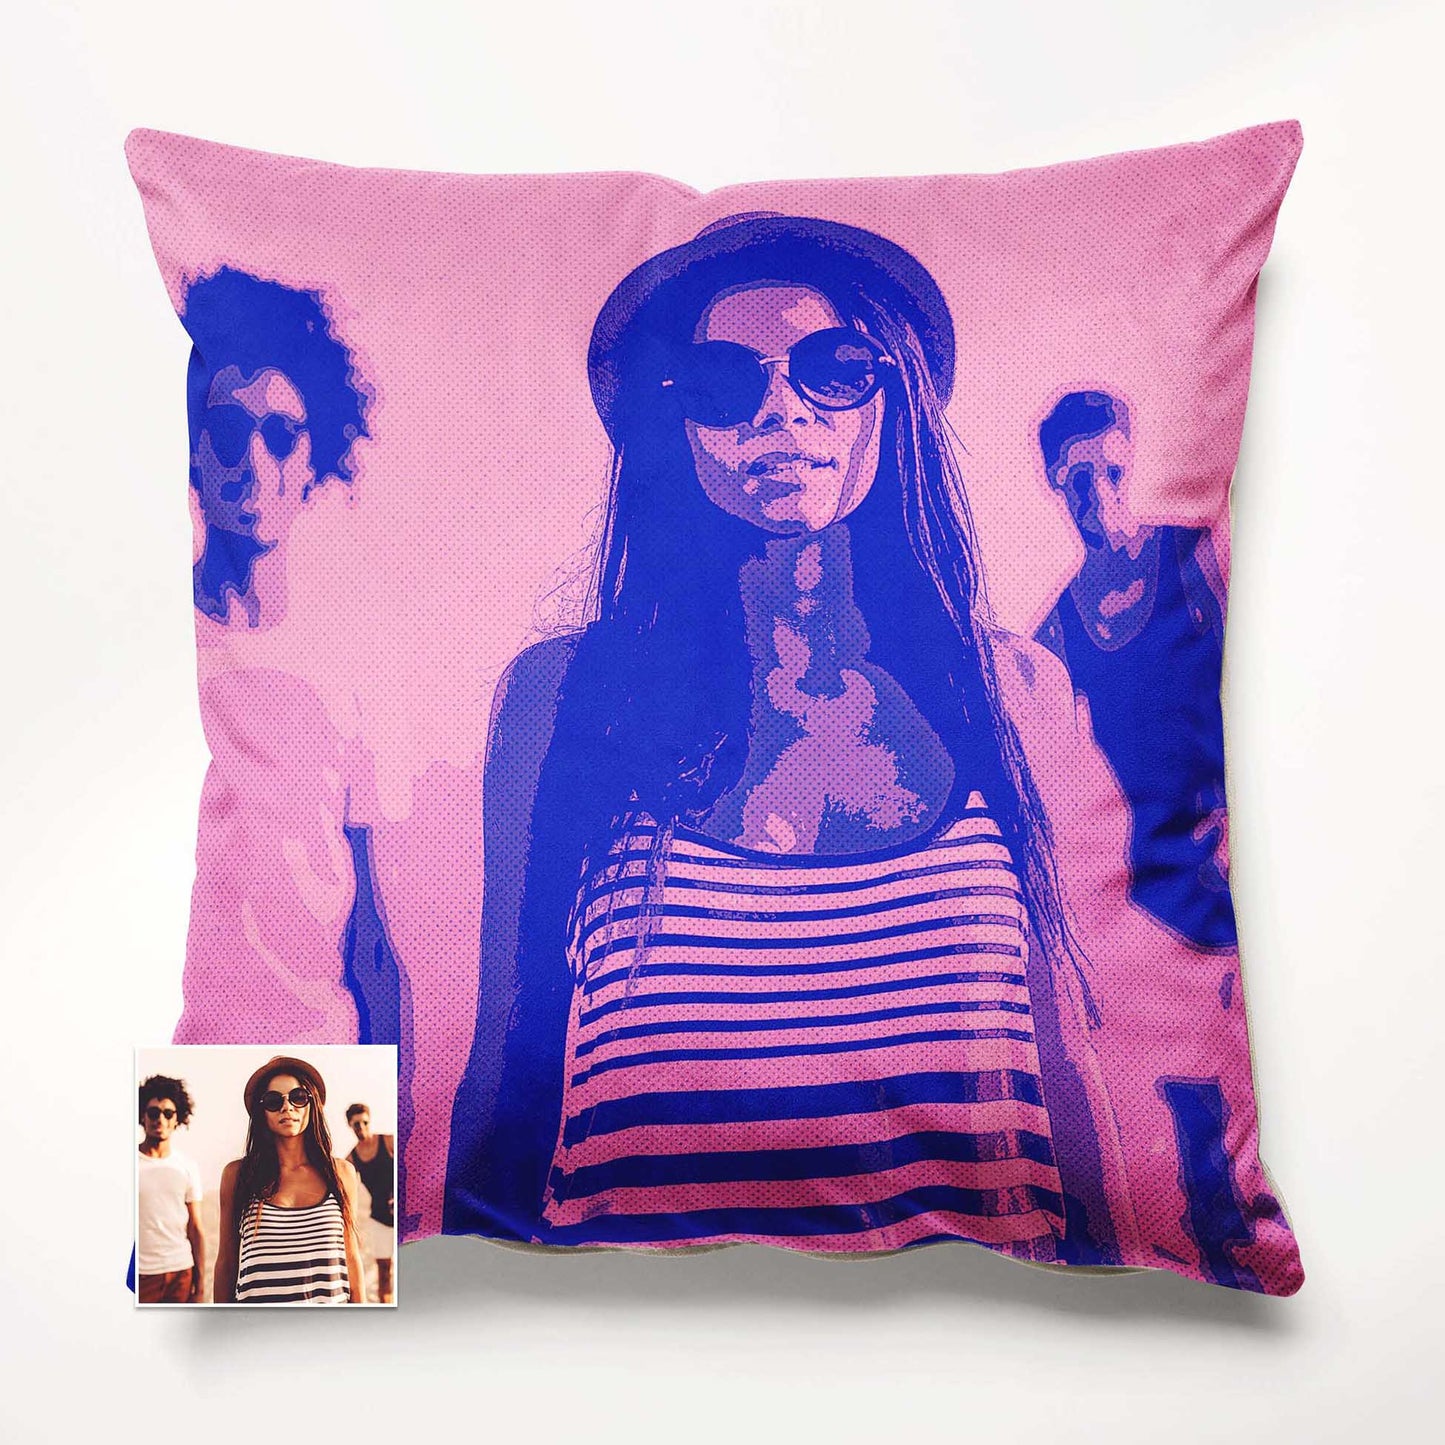 Dive into nostalgia with our Personalised Purple and Pink Comics Cushion. Designed in a vibrant old-school cartoon style, this cushion brings retro charm to any space. Transform your photo into a personalized comic artwork 